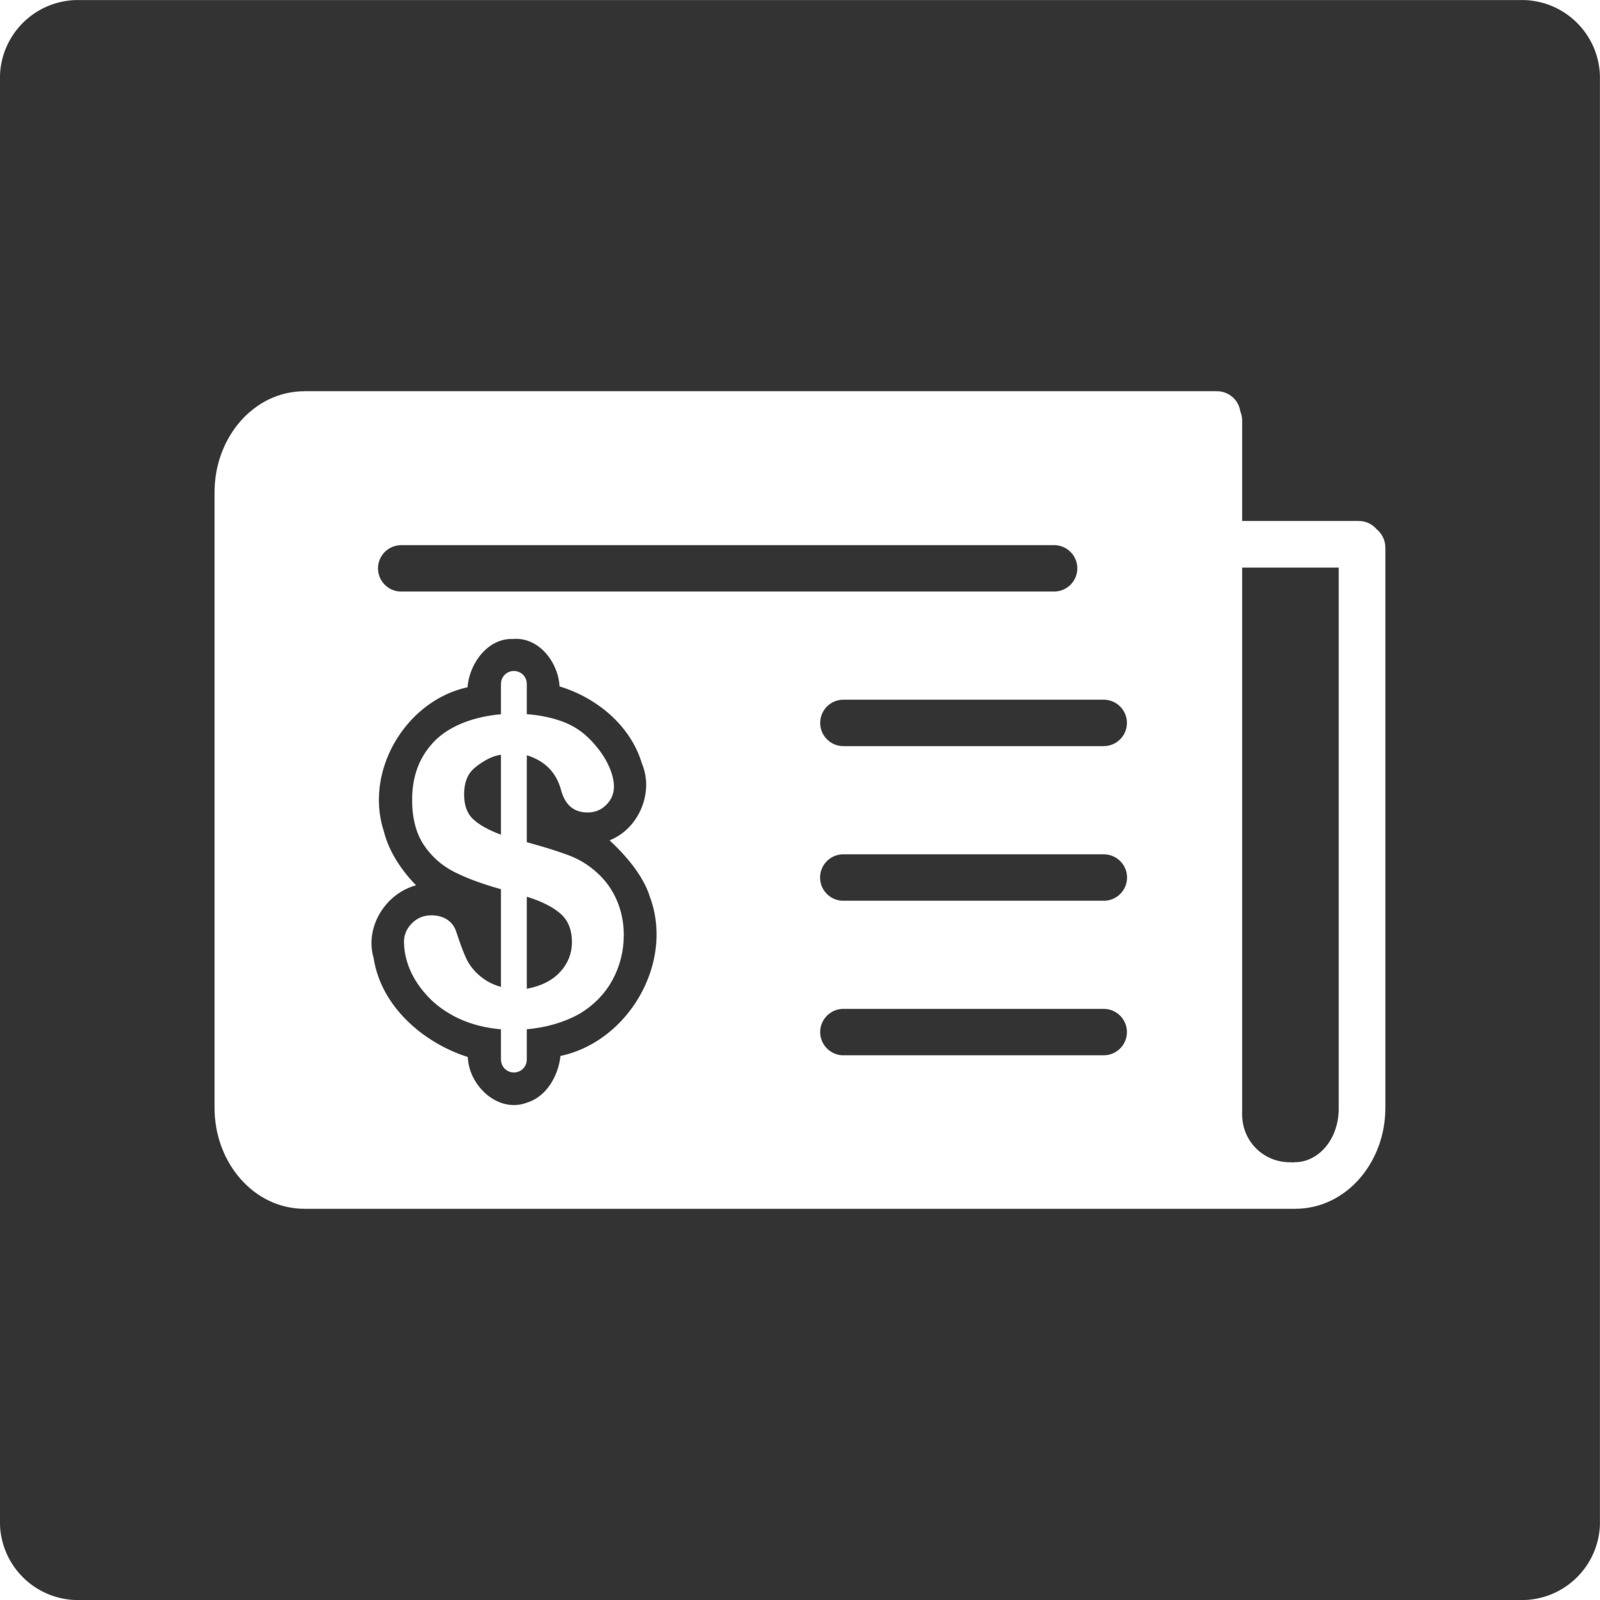 Financial News icon. Vector style is white and gray colors, flat square rounded button, white background.